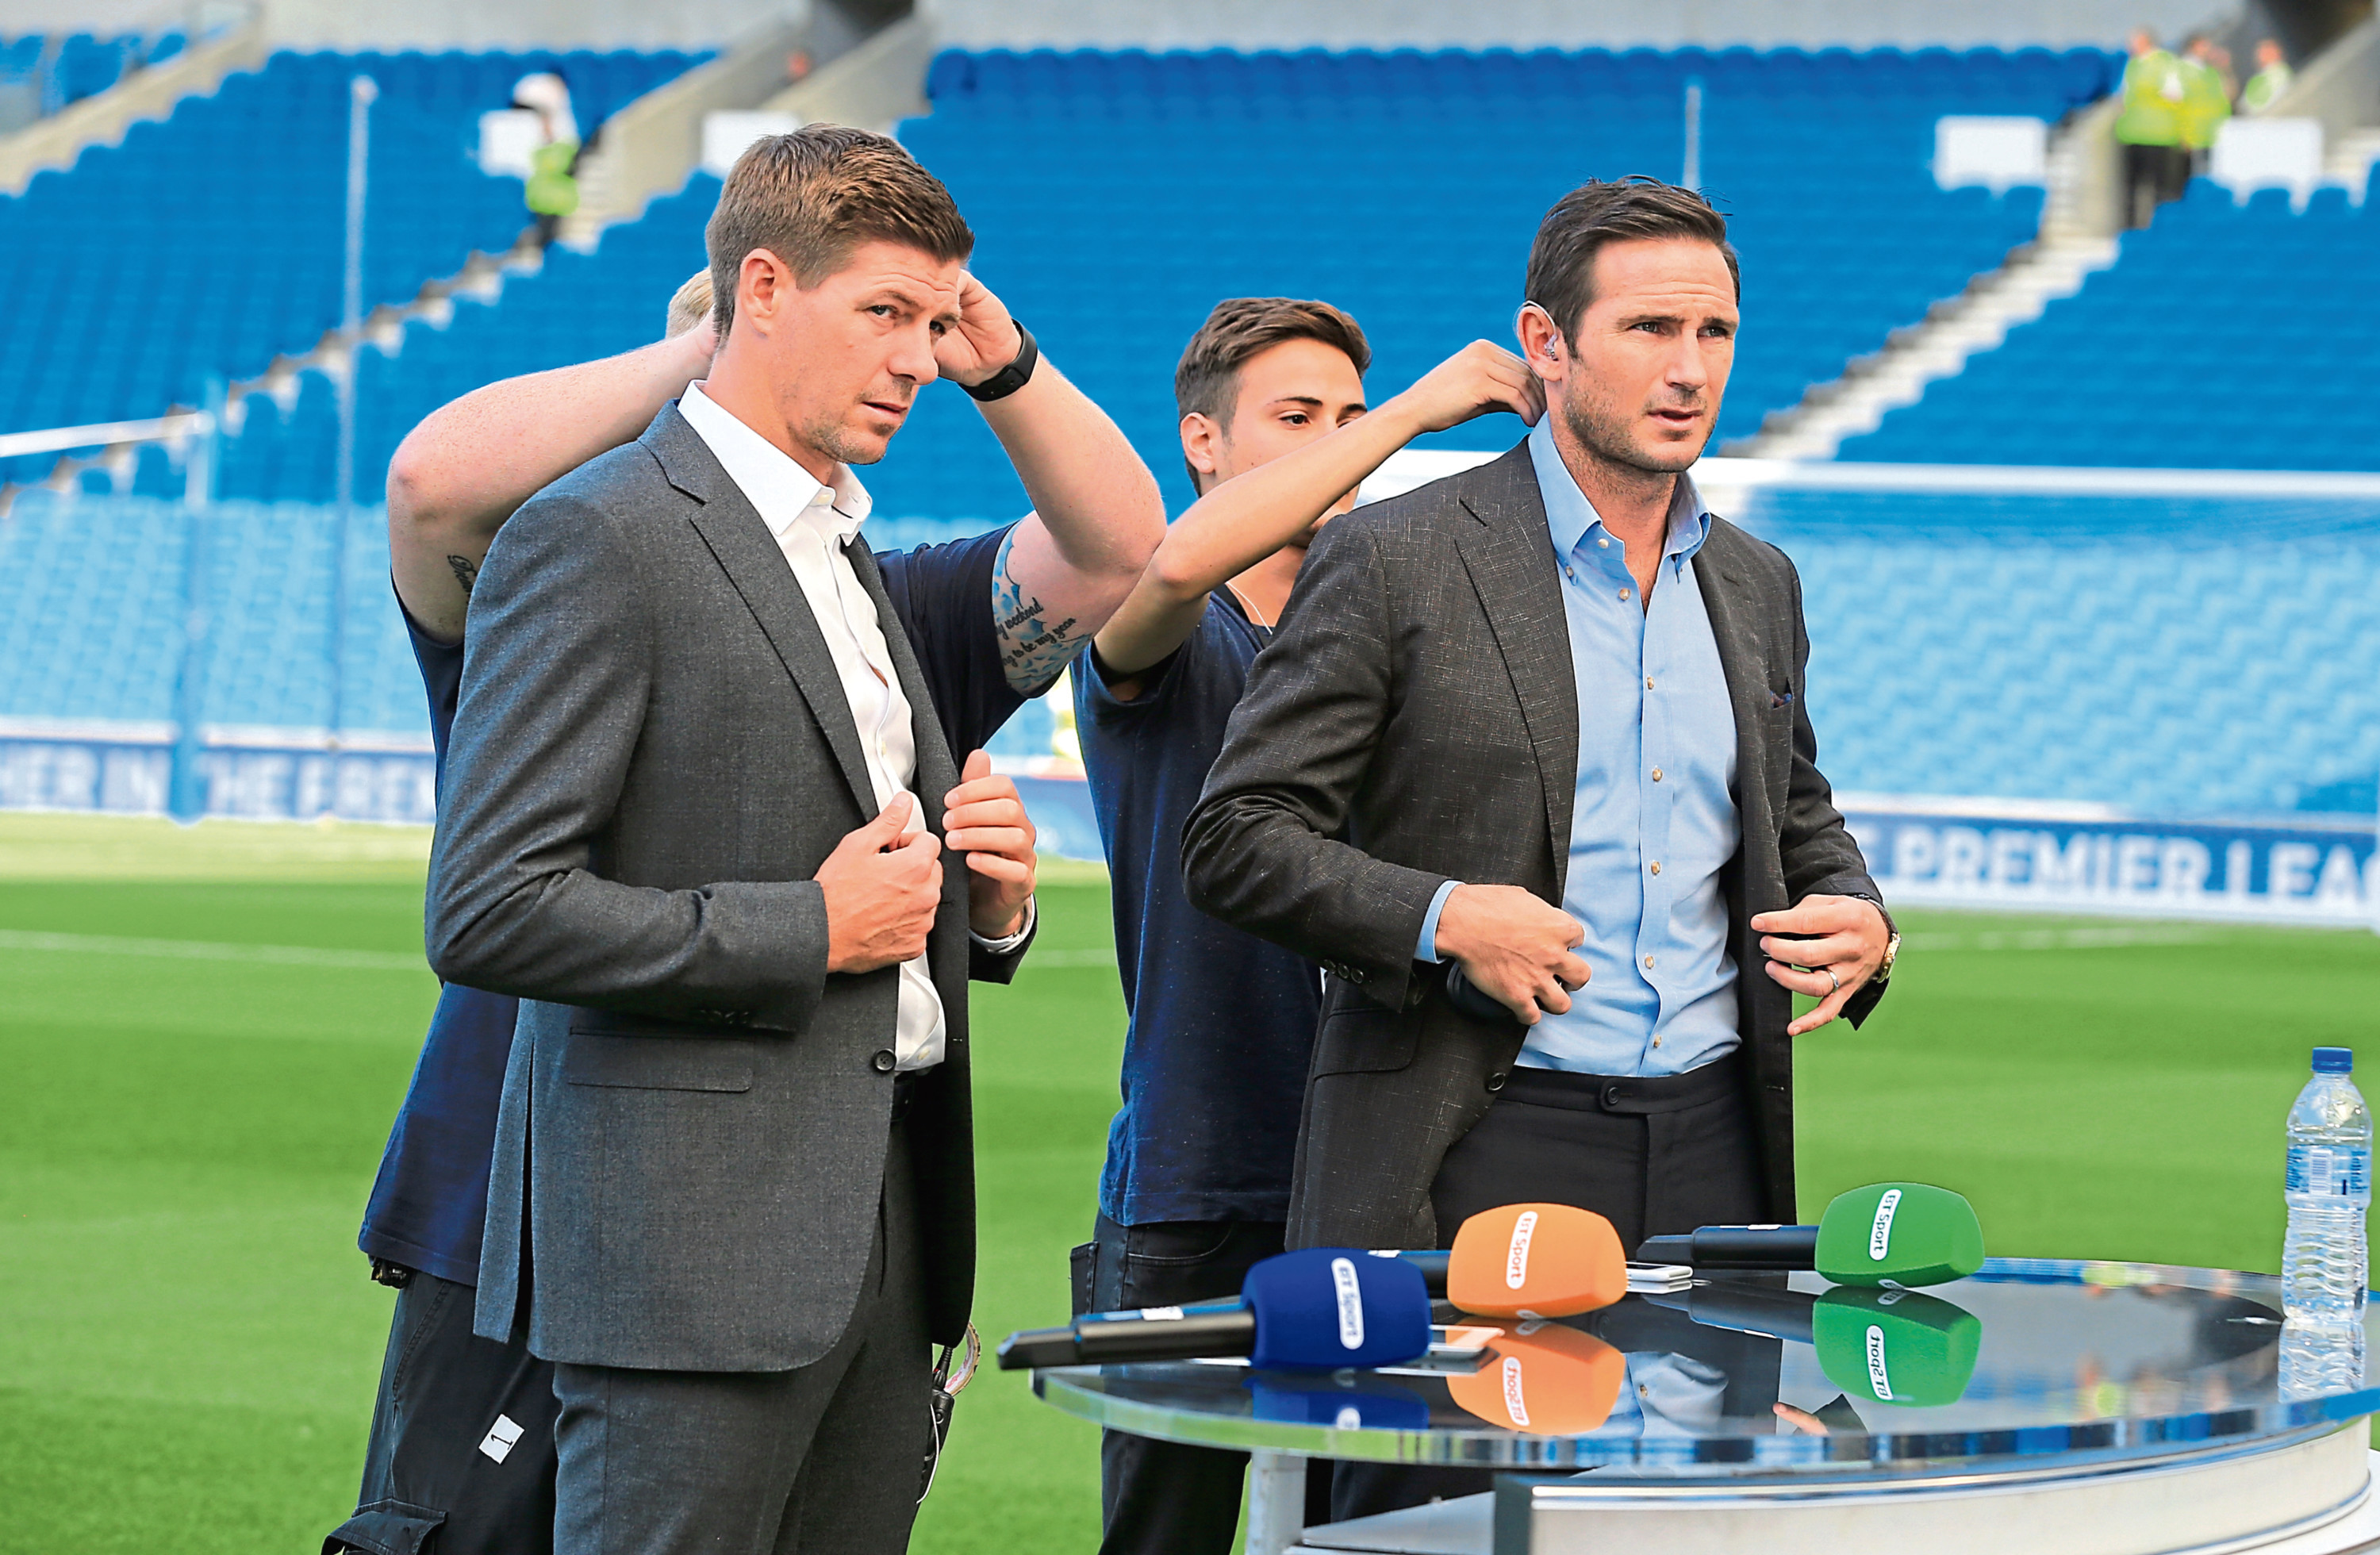 Steven Gerrard and Frank Lampard will both make their management debuts in the coming season (Gareth Fuller/PA Wire)